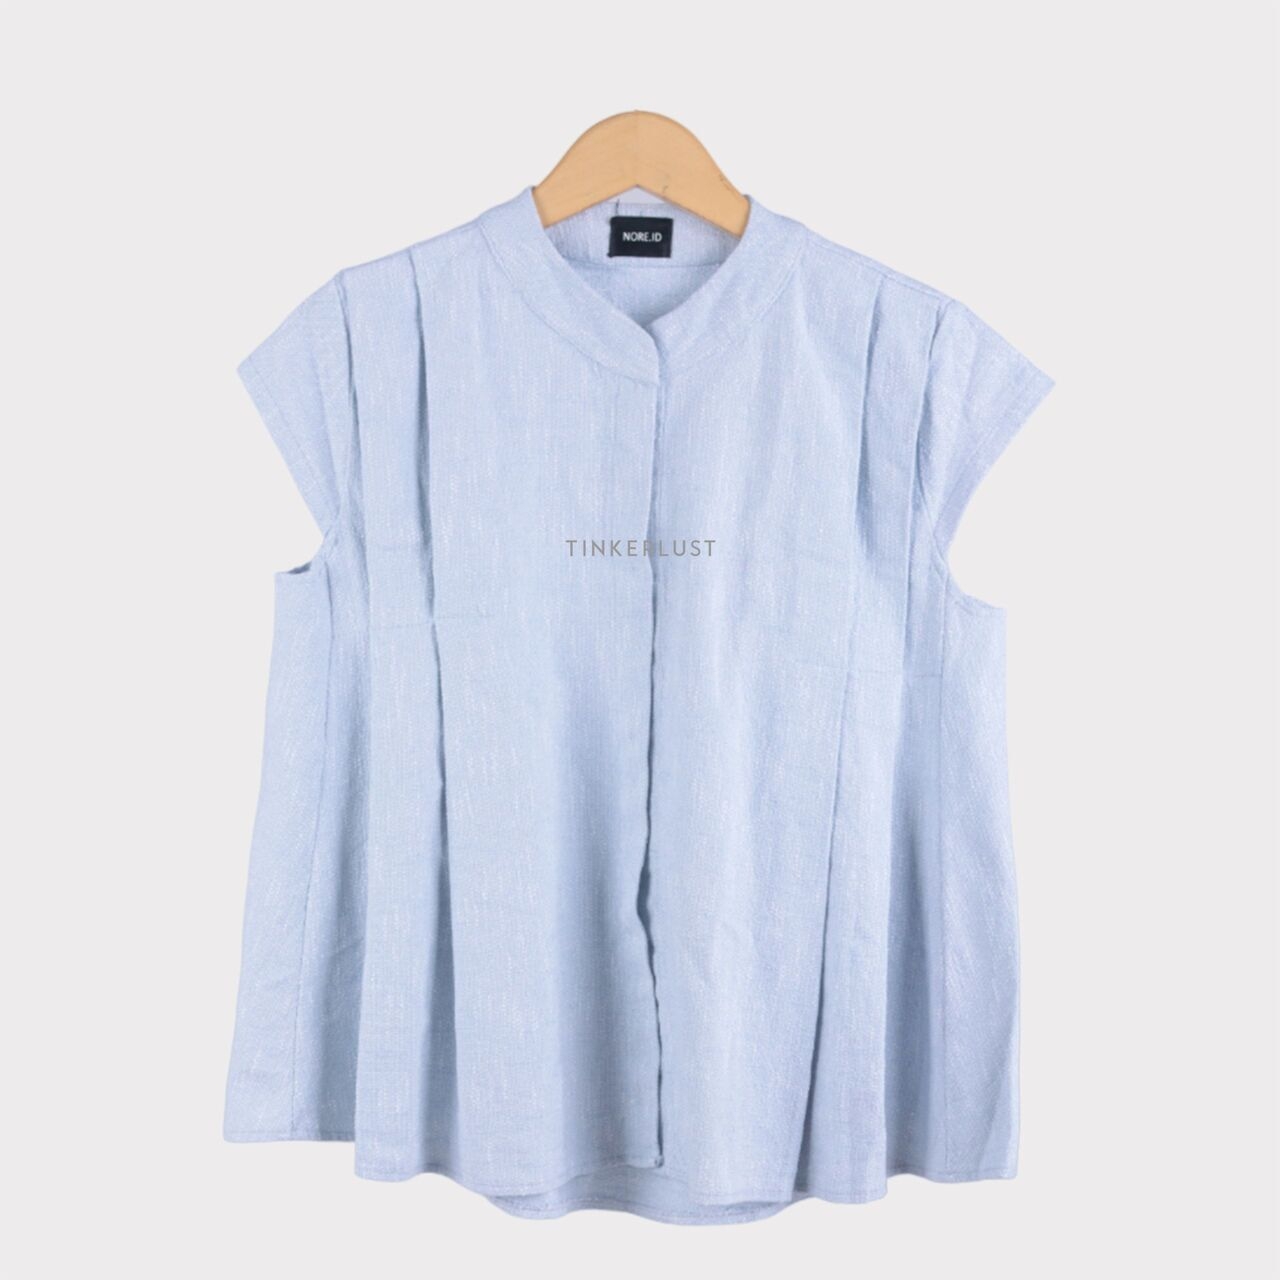 Nore.id Light Blue Blouse